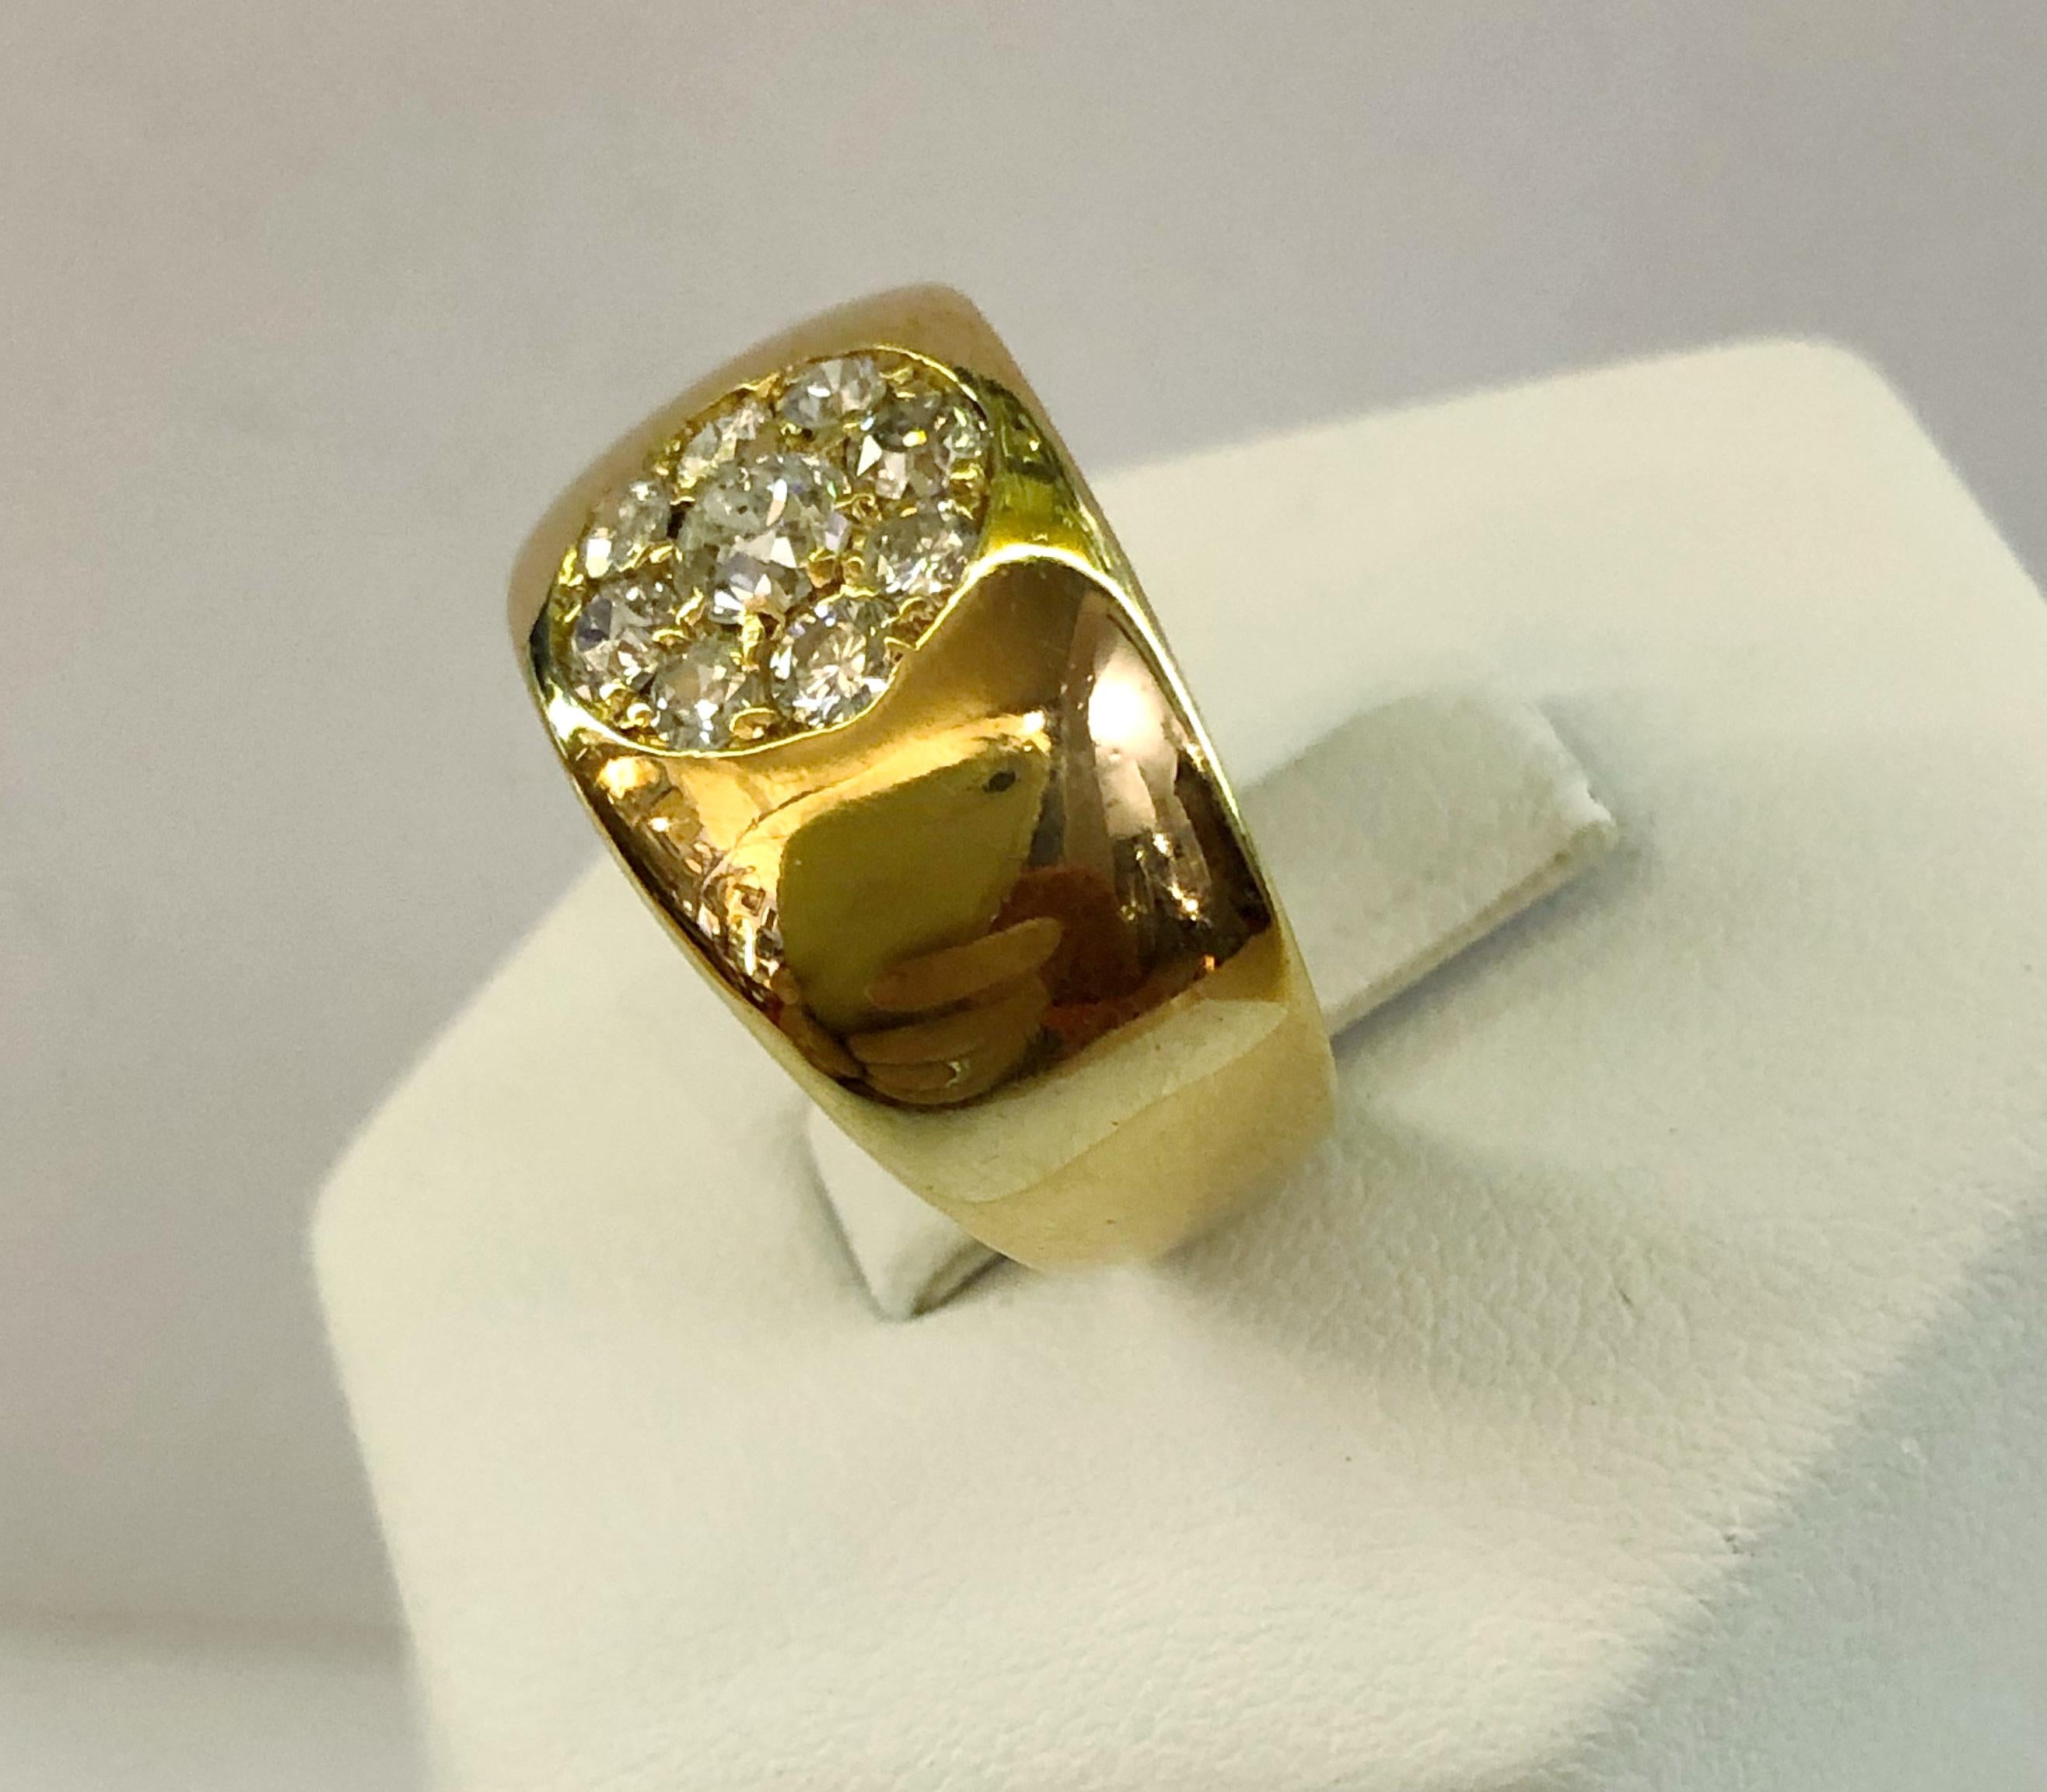 Vintage 18 karat yellow gold band ring, with brilliant diamonds for a total of 0.55 karat in the shape of a daisy, Italy 1960-1970s
Ring size US 6.25